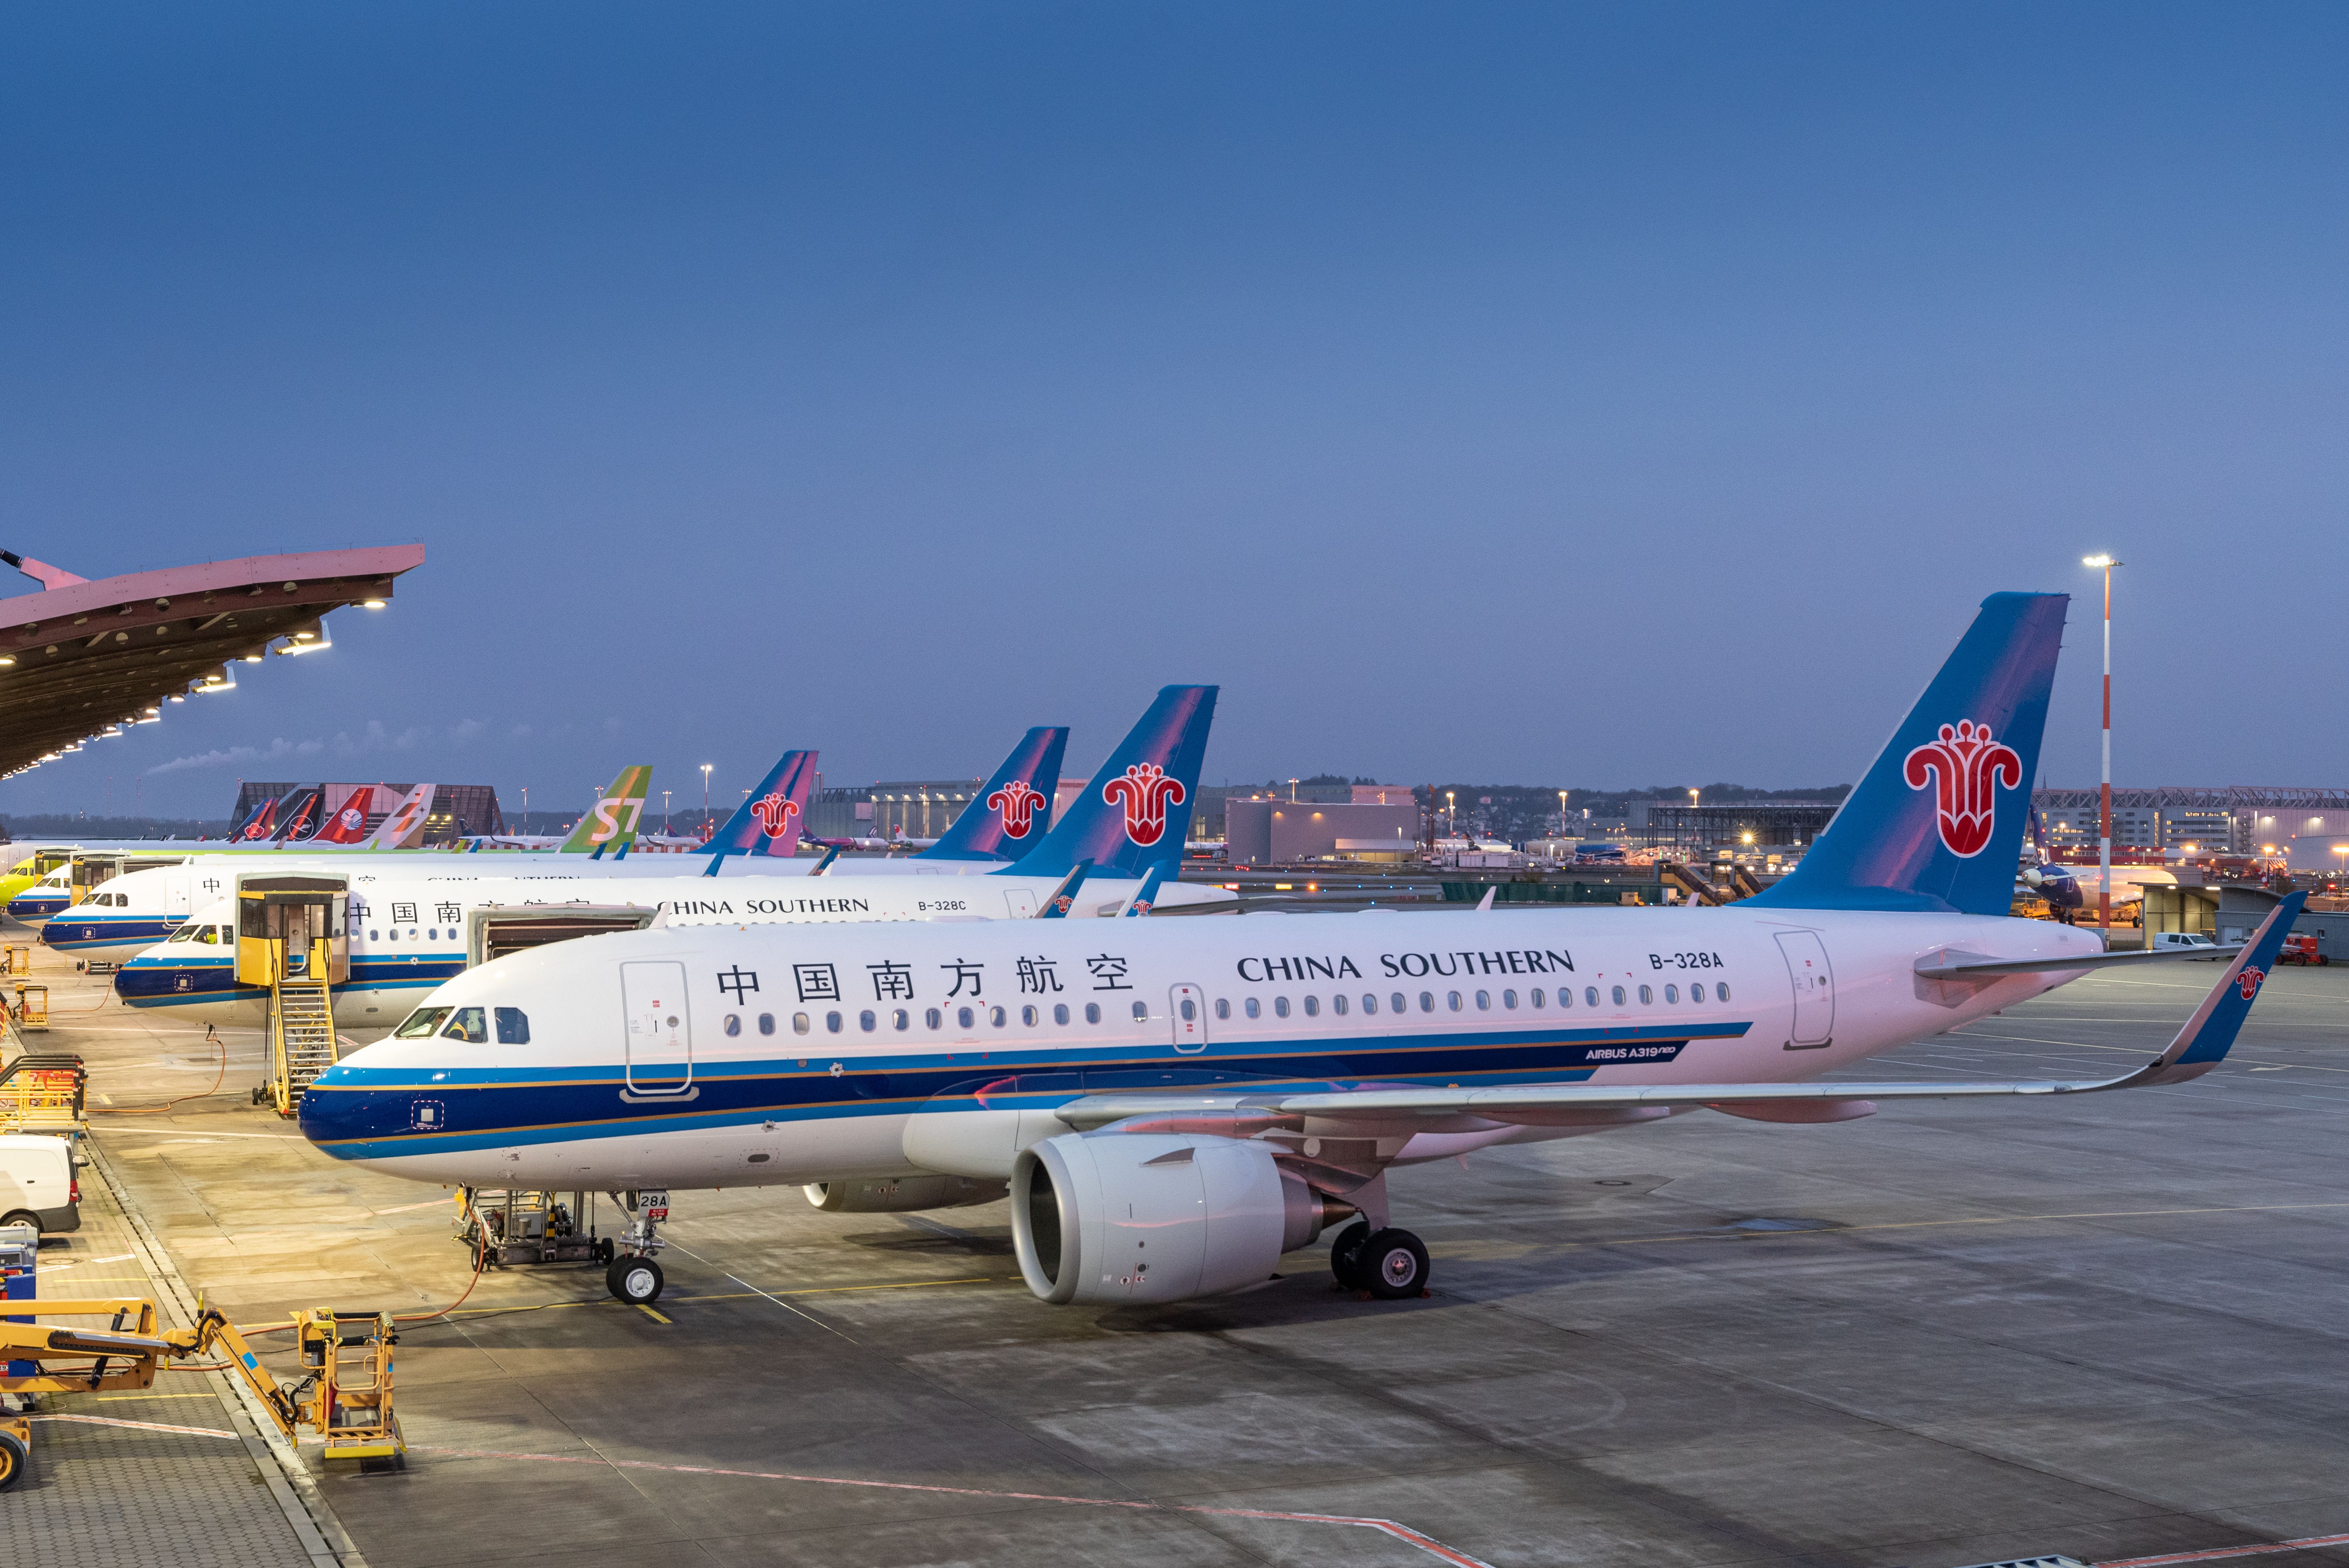 A China Southern Airlines Airbus A319neo Parked At Night.